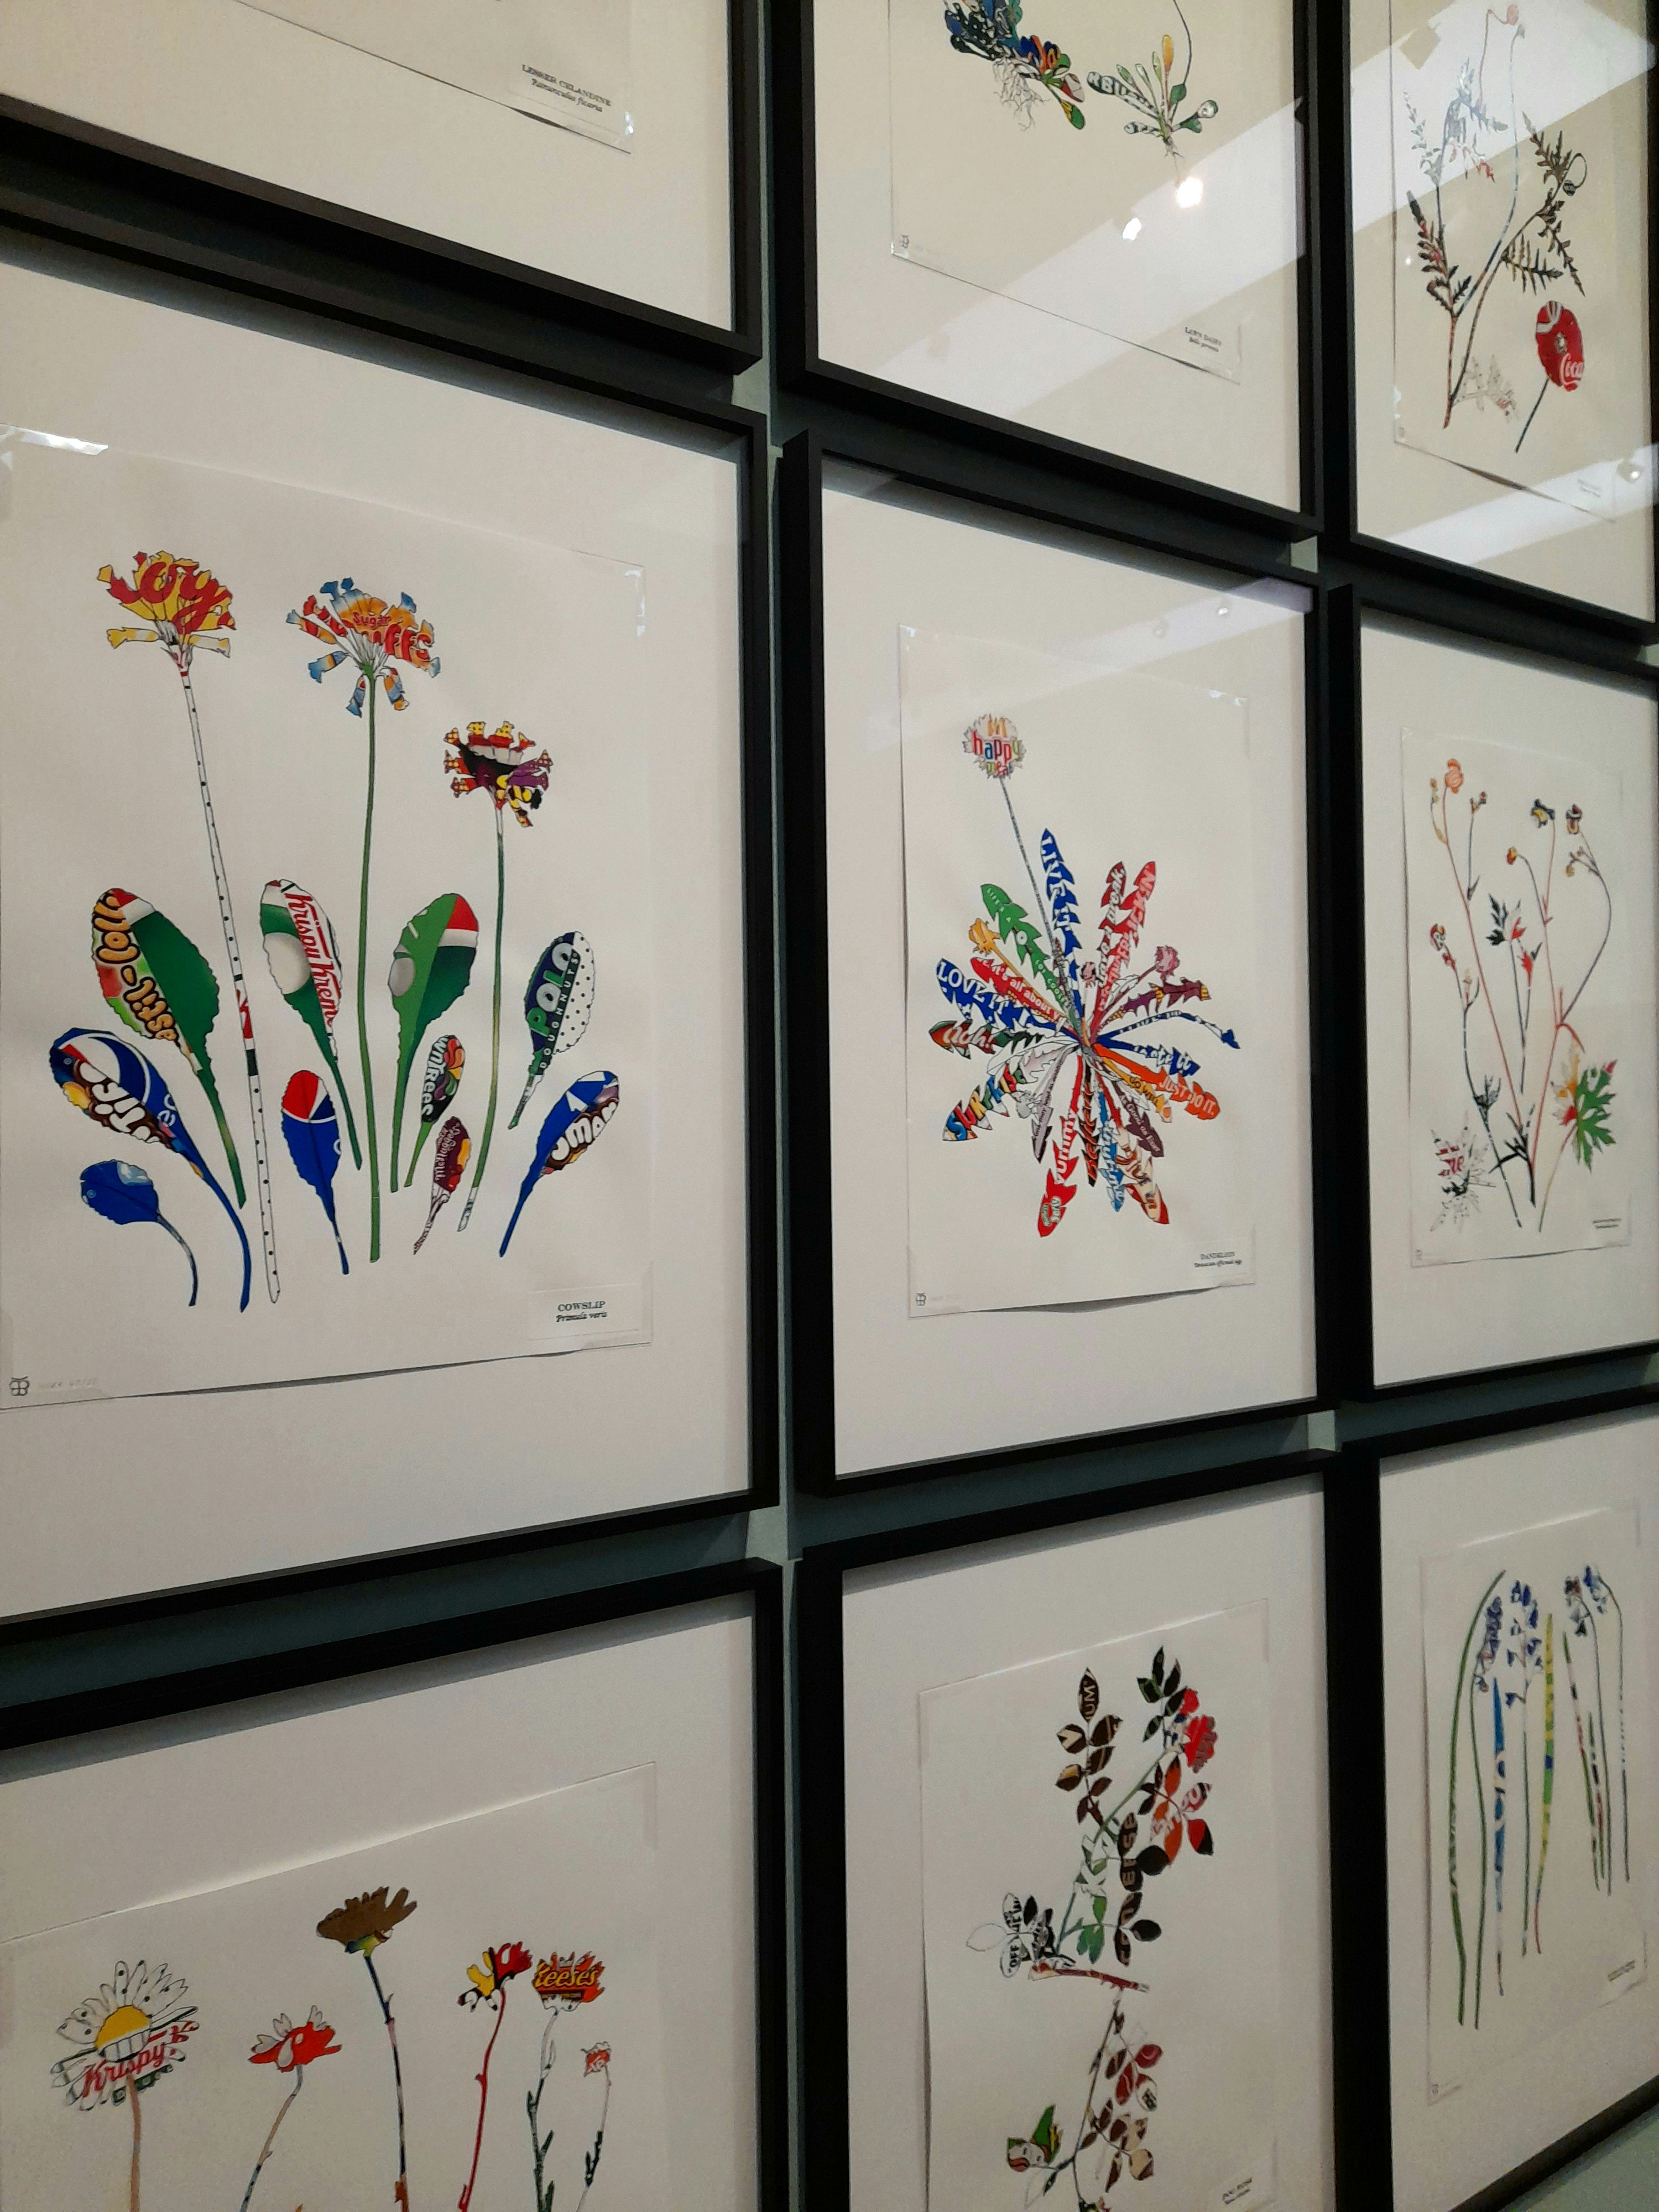 A group of silhouettes of wild plants made from paper packaging in frames on a gallery wall